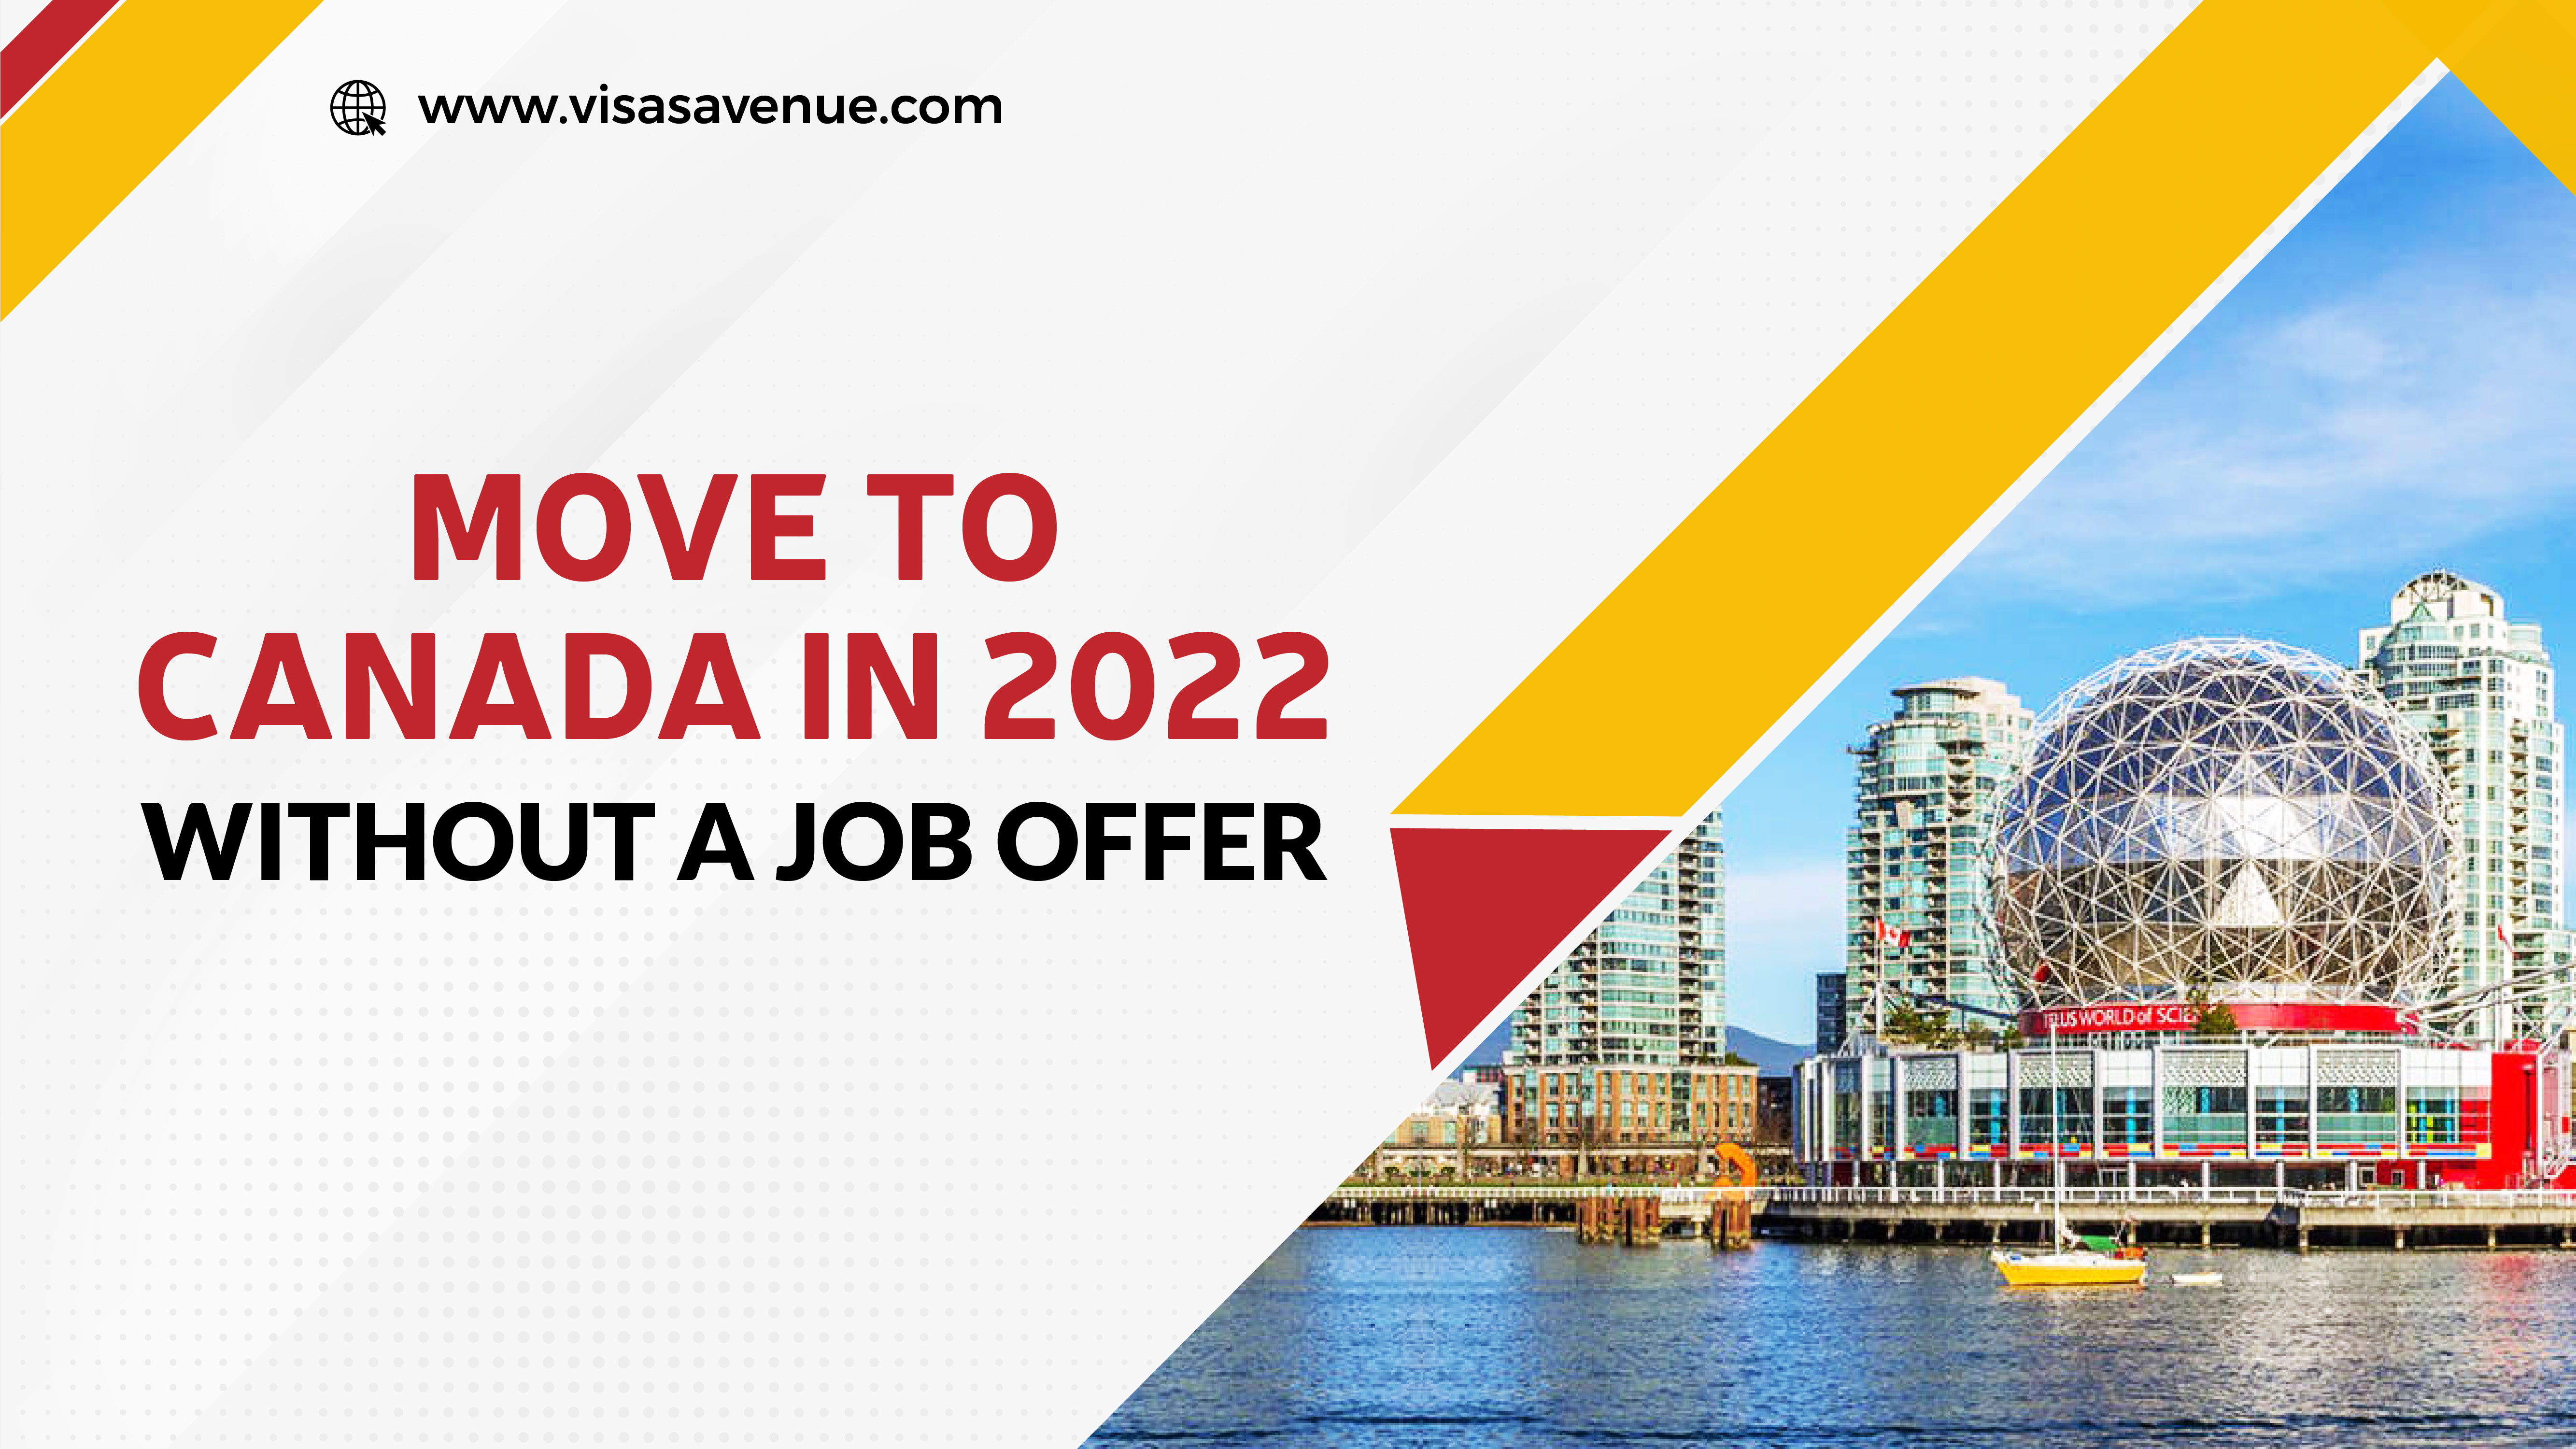 Move to Canada in 2022 without a Job Offer